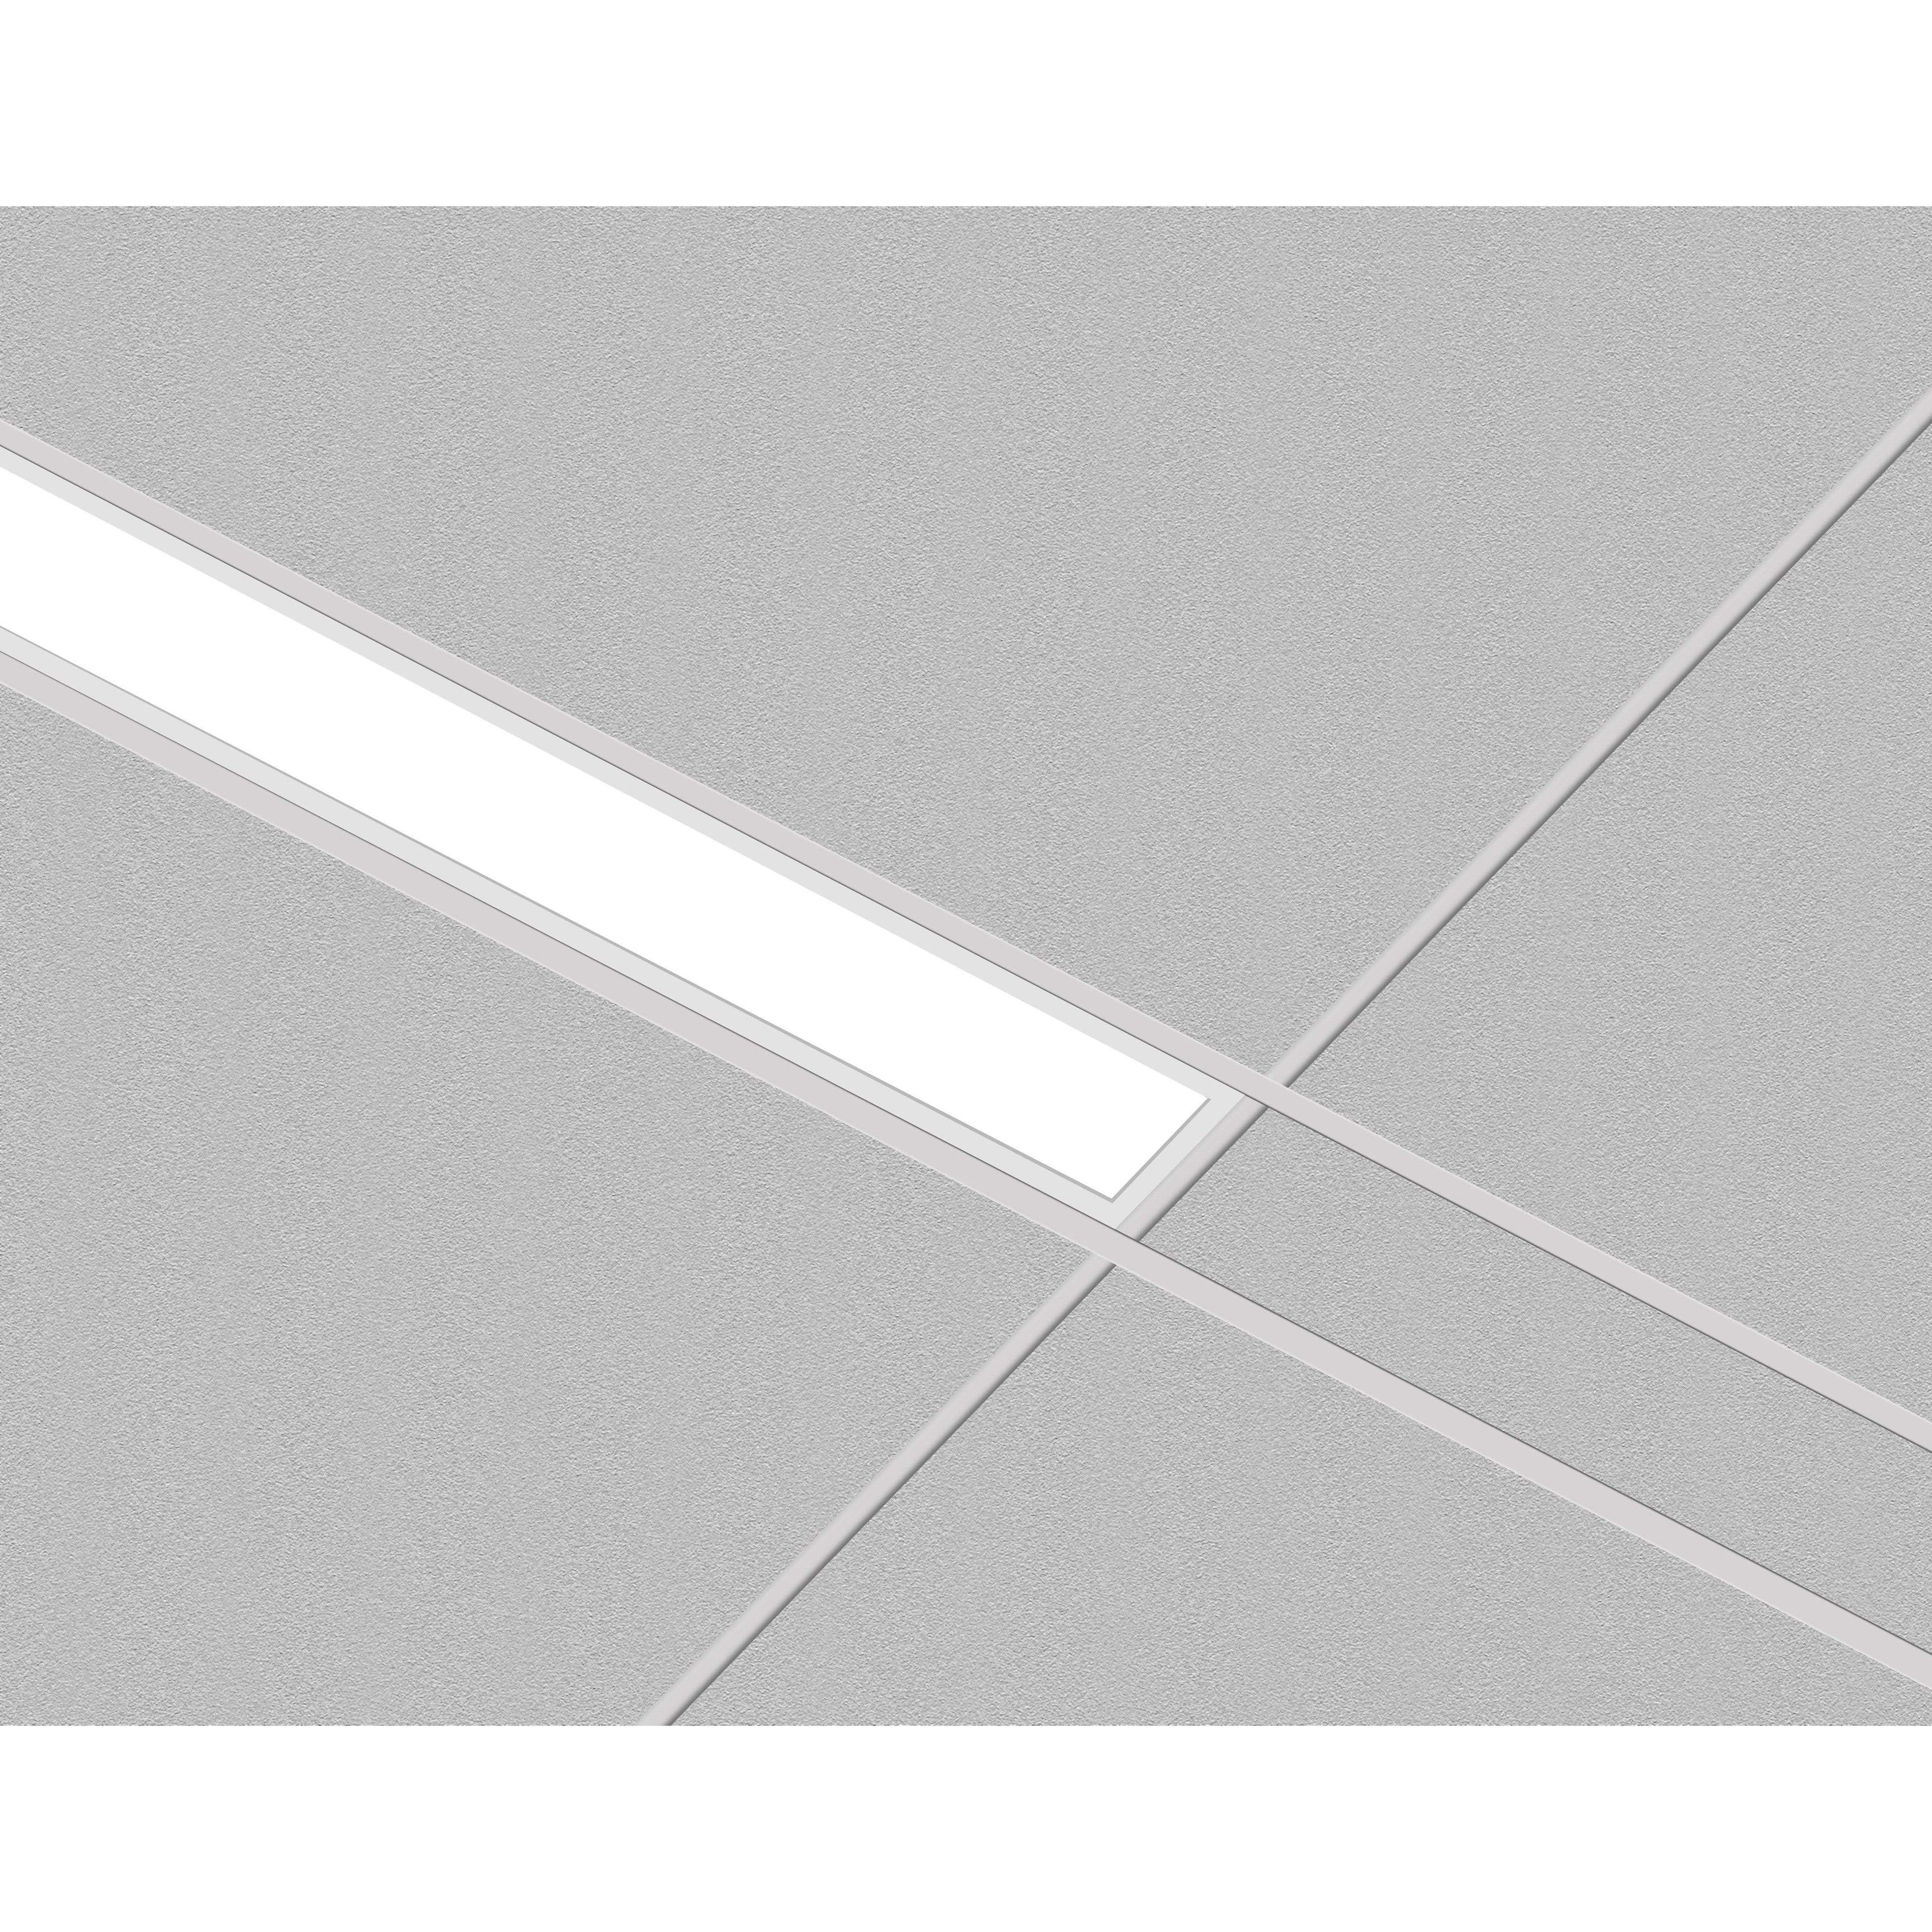 POE Texas Lighting Denton Linear Recessed PoE Lights - 4 in x 4 ft (Recessed)